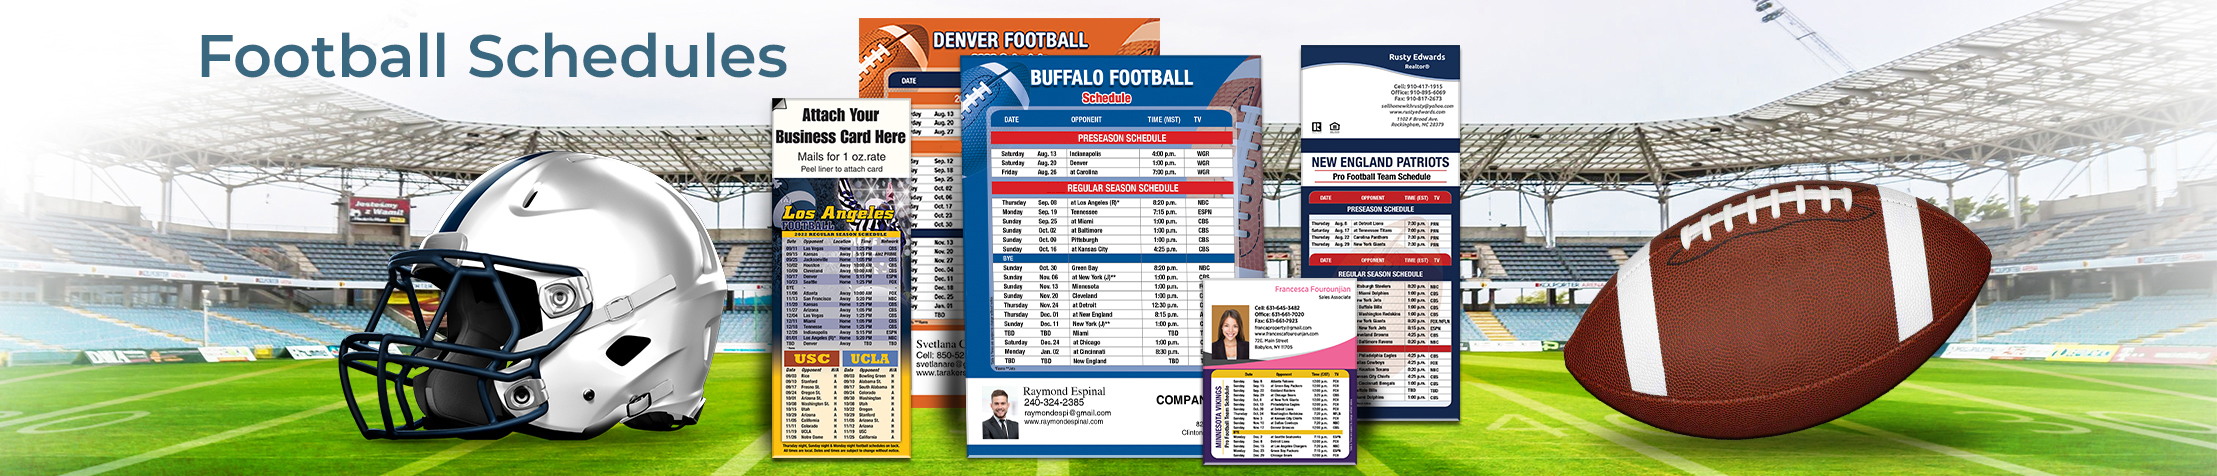 Coldwell Banker Real Estate Football Schedules - Coldwell Banker personalized football schedules | BestPrintBuy.com